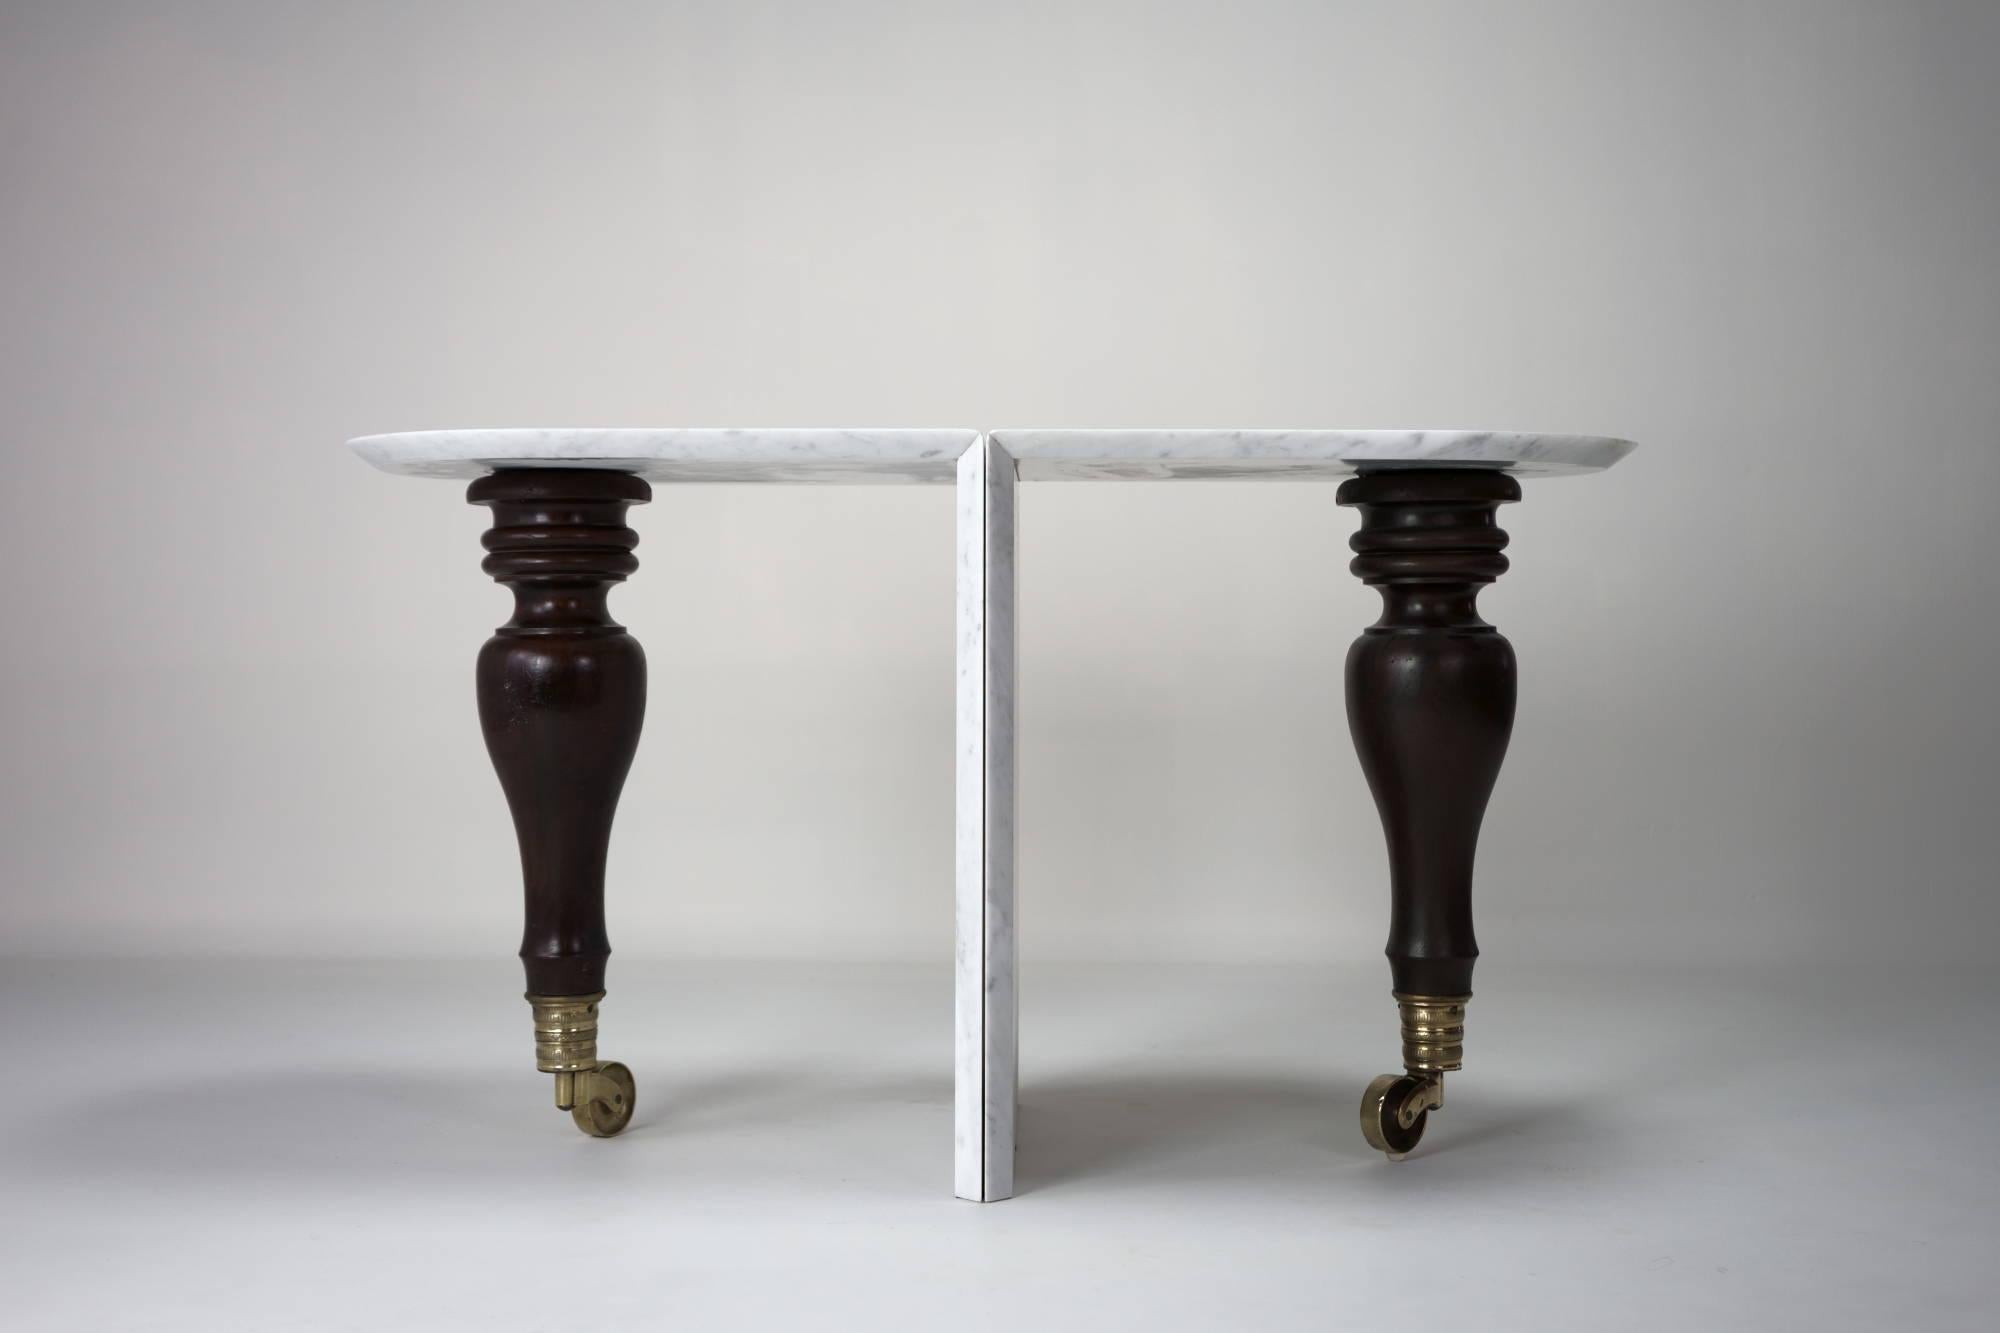 Pianoforte - Carrara Marble Side Table By DFdesignlab Handmade in Italy For Sale 2